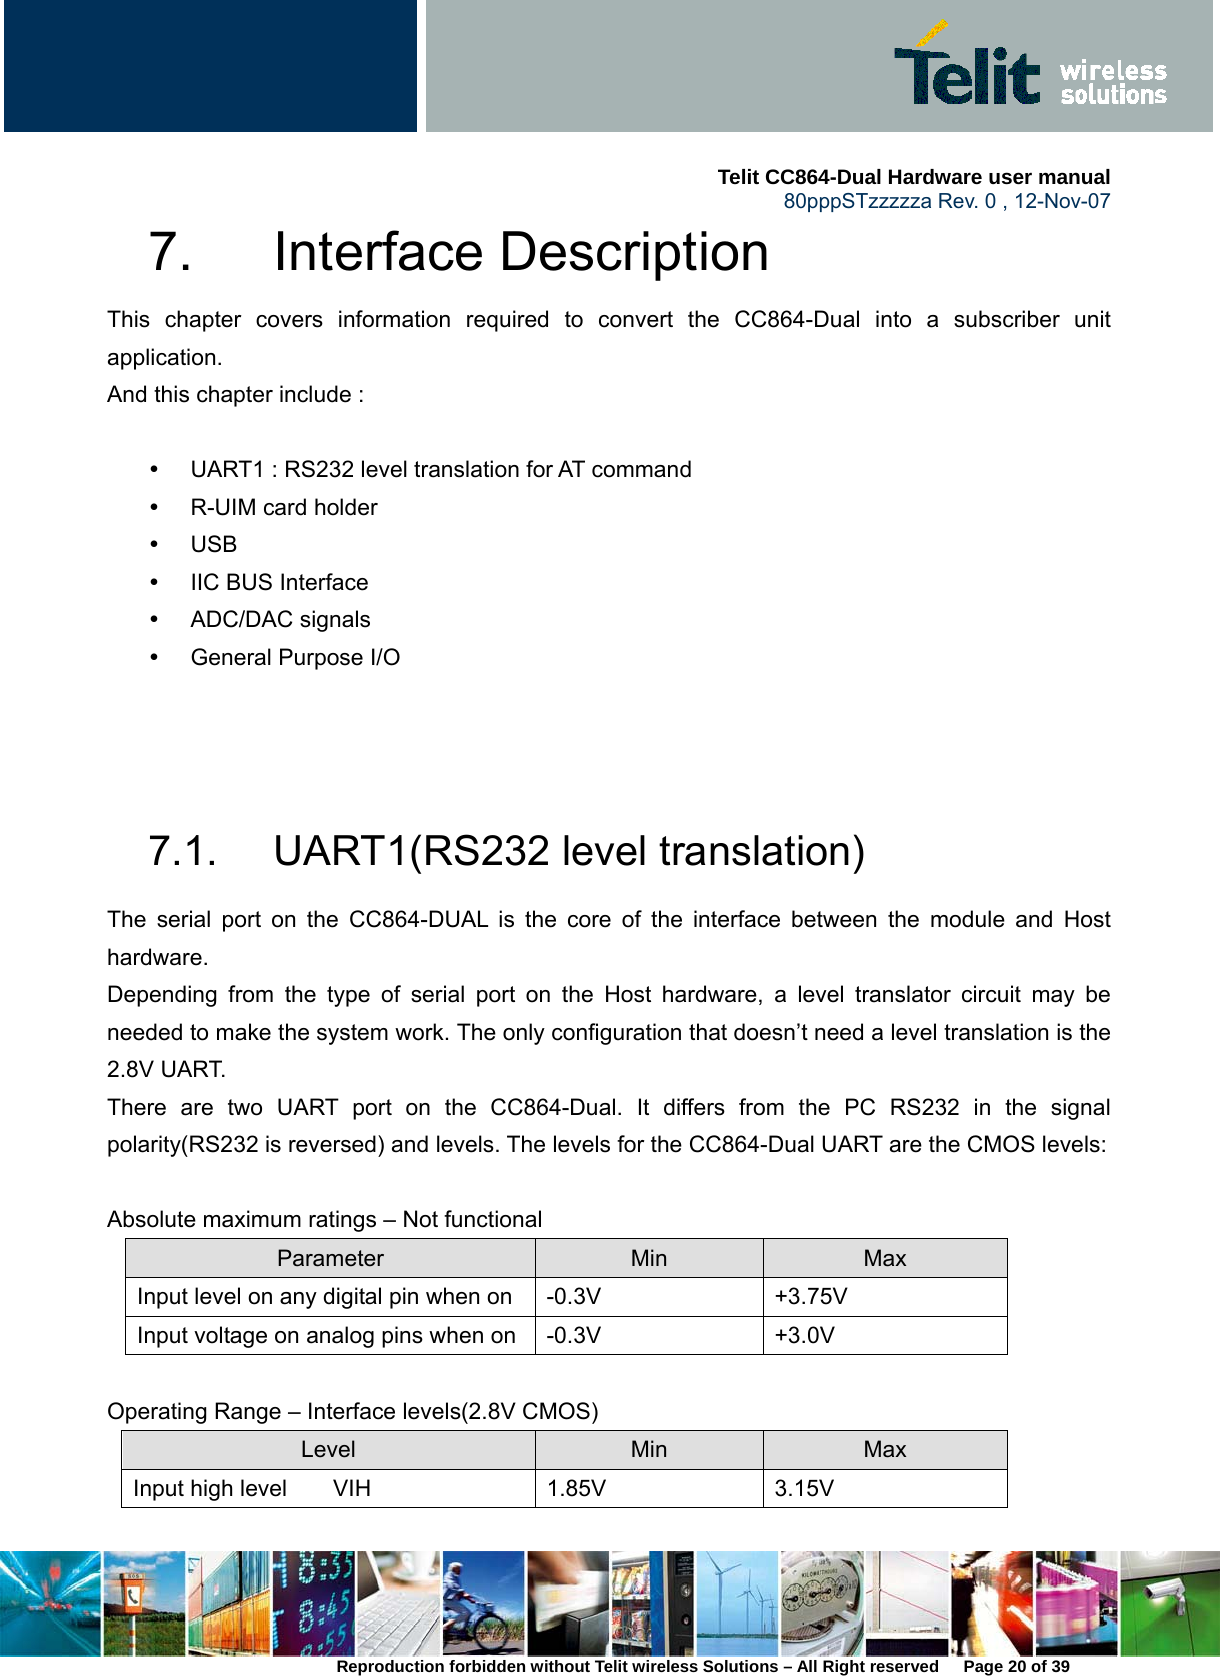     Telit CC864-Dual Hardware user manual   80pppSTzzzzza Rev. 0 , 12-Nov-07 Reproduction forbidden without Telit wireless Solutions – All Right reserved      Page 20 of 39 7. Interface Description This chapter covers information required to convert the CC864-Dual into a subscriber unit application.  And this chapter include :    y  UART1 : RS232 level translation for AT command y R-UIM card holder y USB y  IIC BUS Interface y ADC/DAC signals y  General Purpose I/O    7.1.  UART1(RS232 level translation) The serial port on the CC864-DUAL is the core of the interface between the module and Host hardware.  Depending from the type of serial port on the Host hardware, a level translator circuit may be needed to make the system work. The only configuration that doesn’t need a level translation is the 2.8V UART. There are two UART port on the CC864-Dual. It differs from the PC RS232 in the signal polarity(RS232 is reversed) and levels. The levels for the CC864-Dual UART are the CMOS levels:    Absolute maximum ratings – Not functional Parameter  Min  Max Input level on any digital pin when on  -0.3V  +3.75V Input voltage on analog pins when on -0.3V  +3.0V  Operating Range – Interface levels(2.8V CMOS) Level  Min  Max Input high level    VIH  1.85V  3.15V 